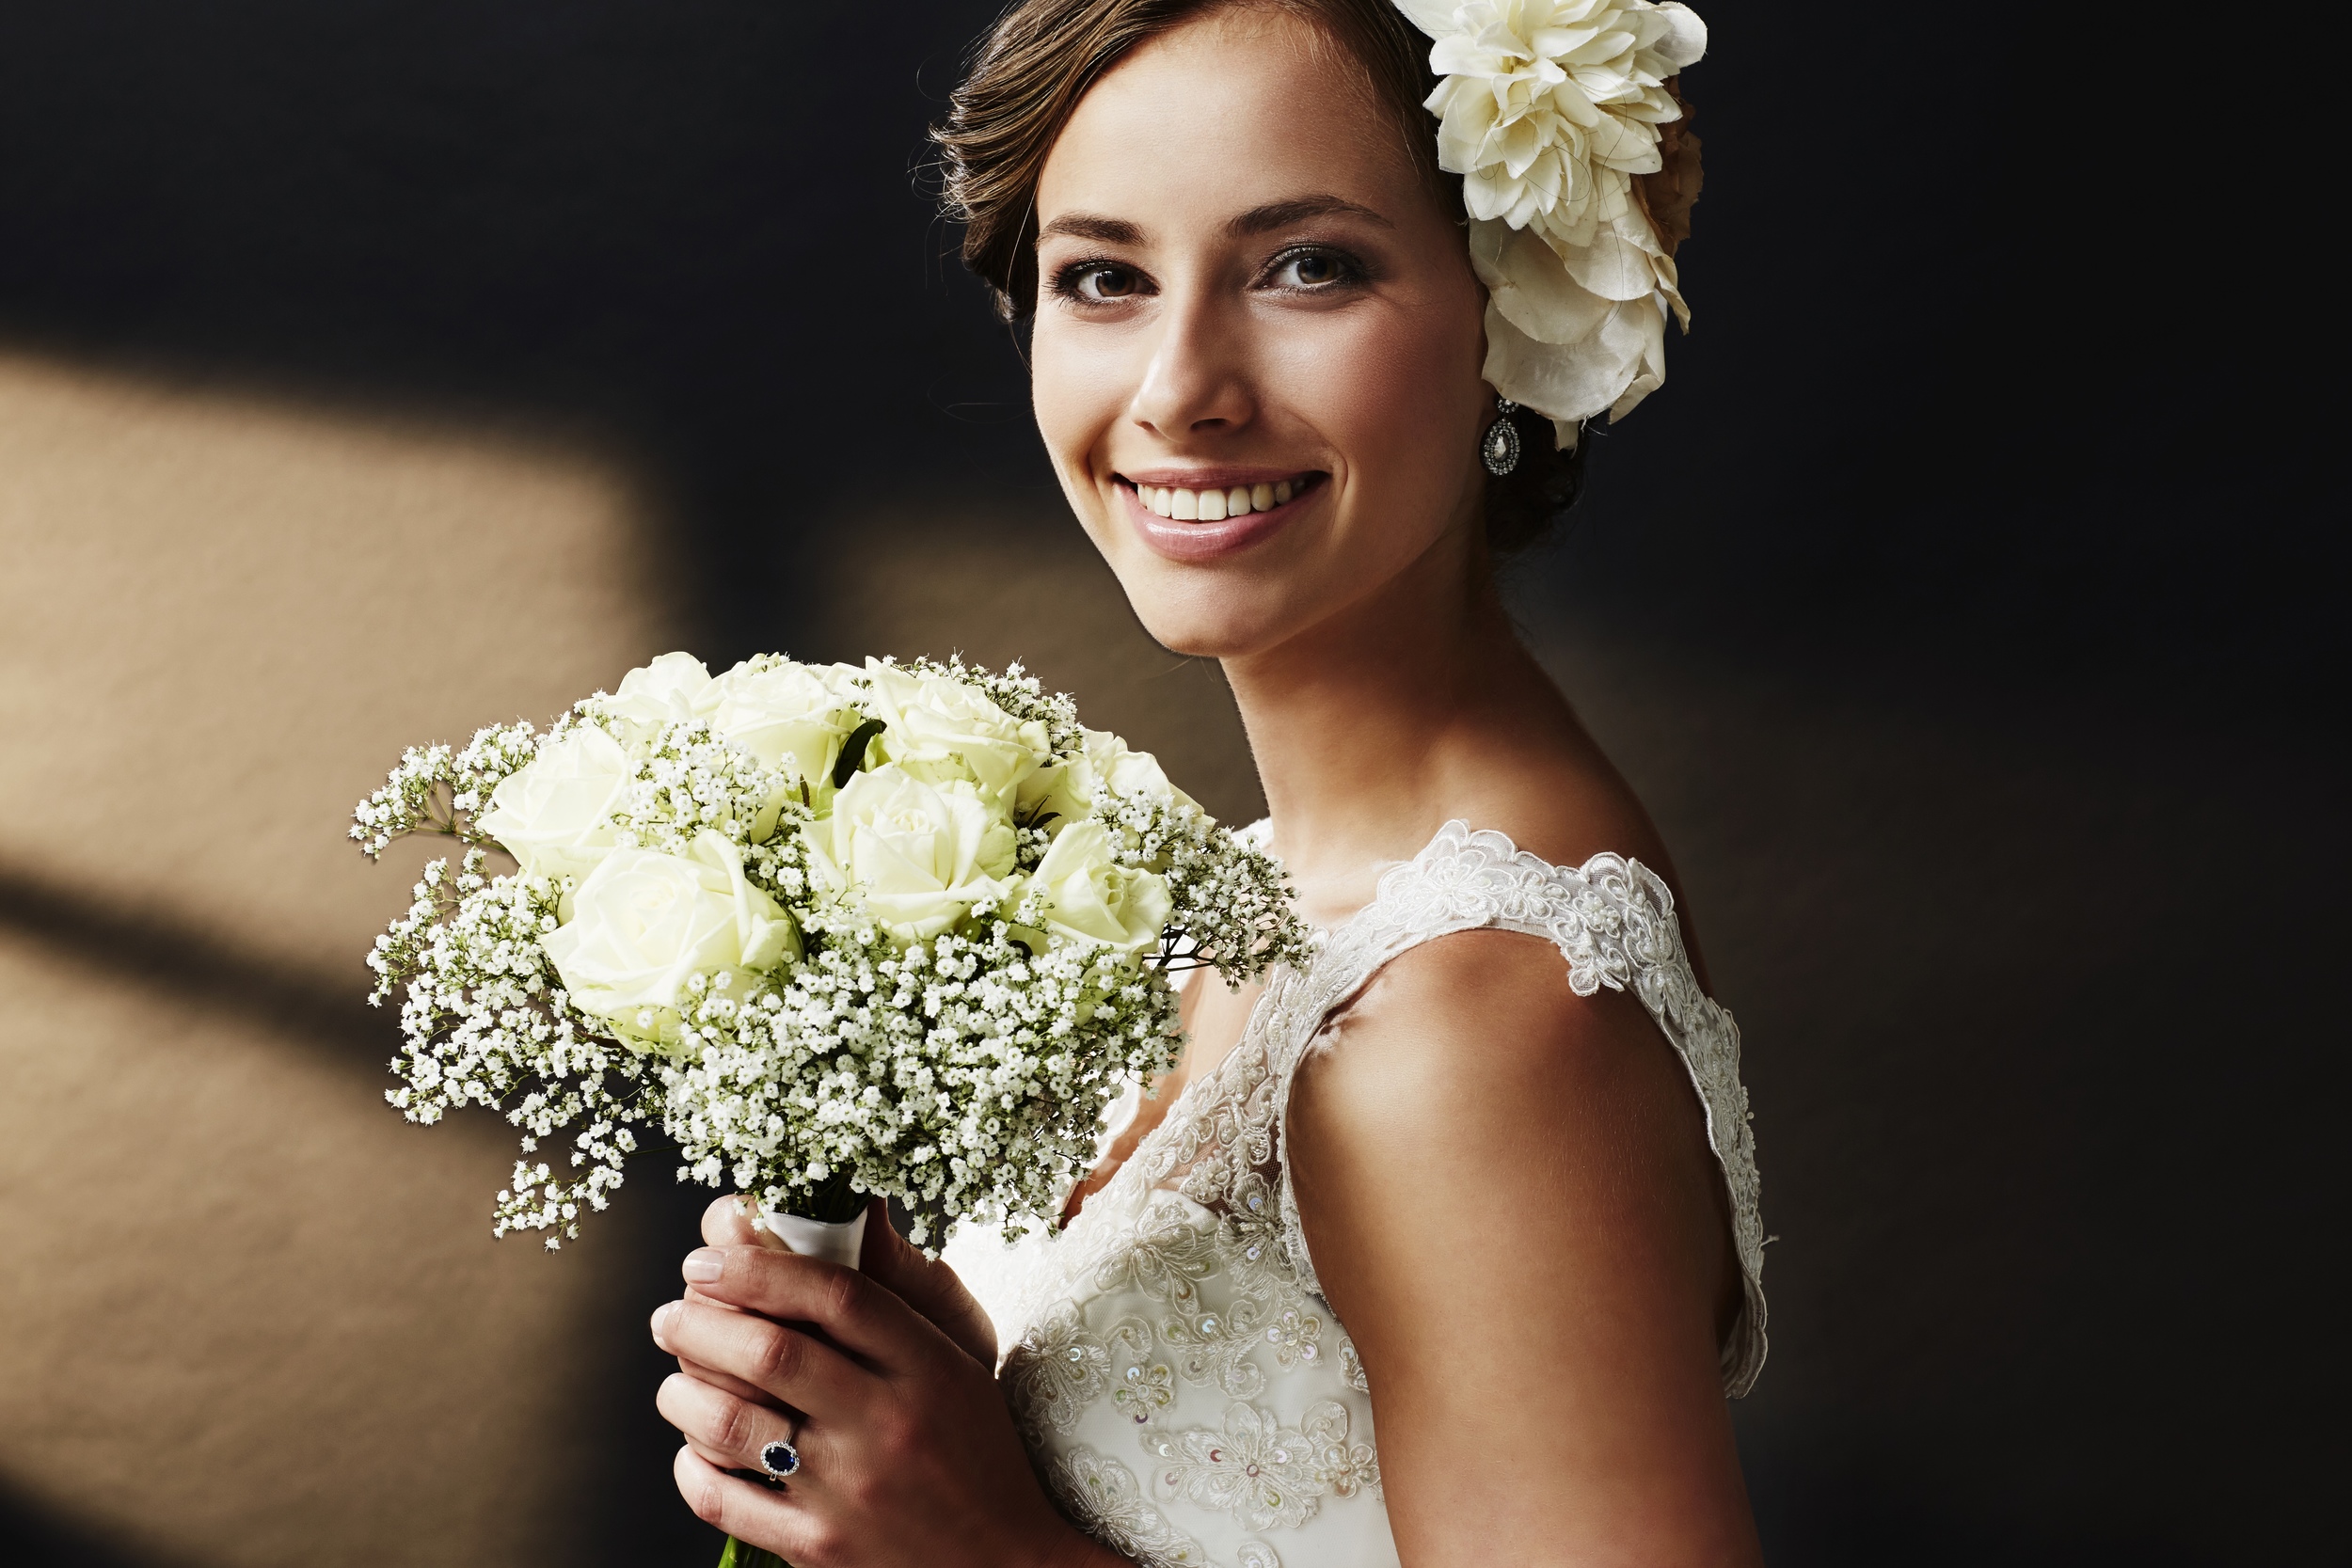 Stunning young bride holding bouquet, portrait